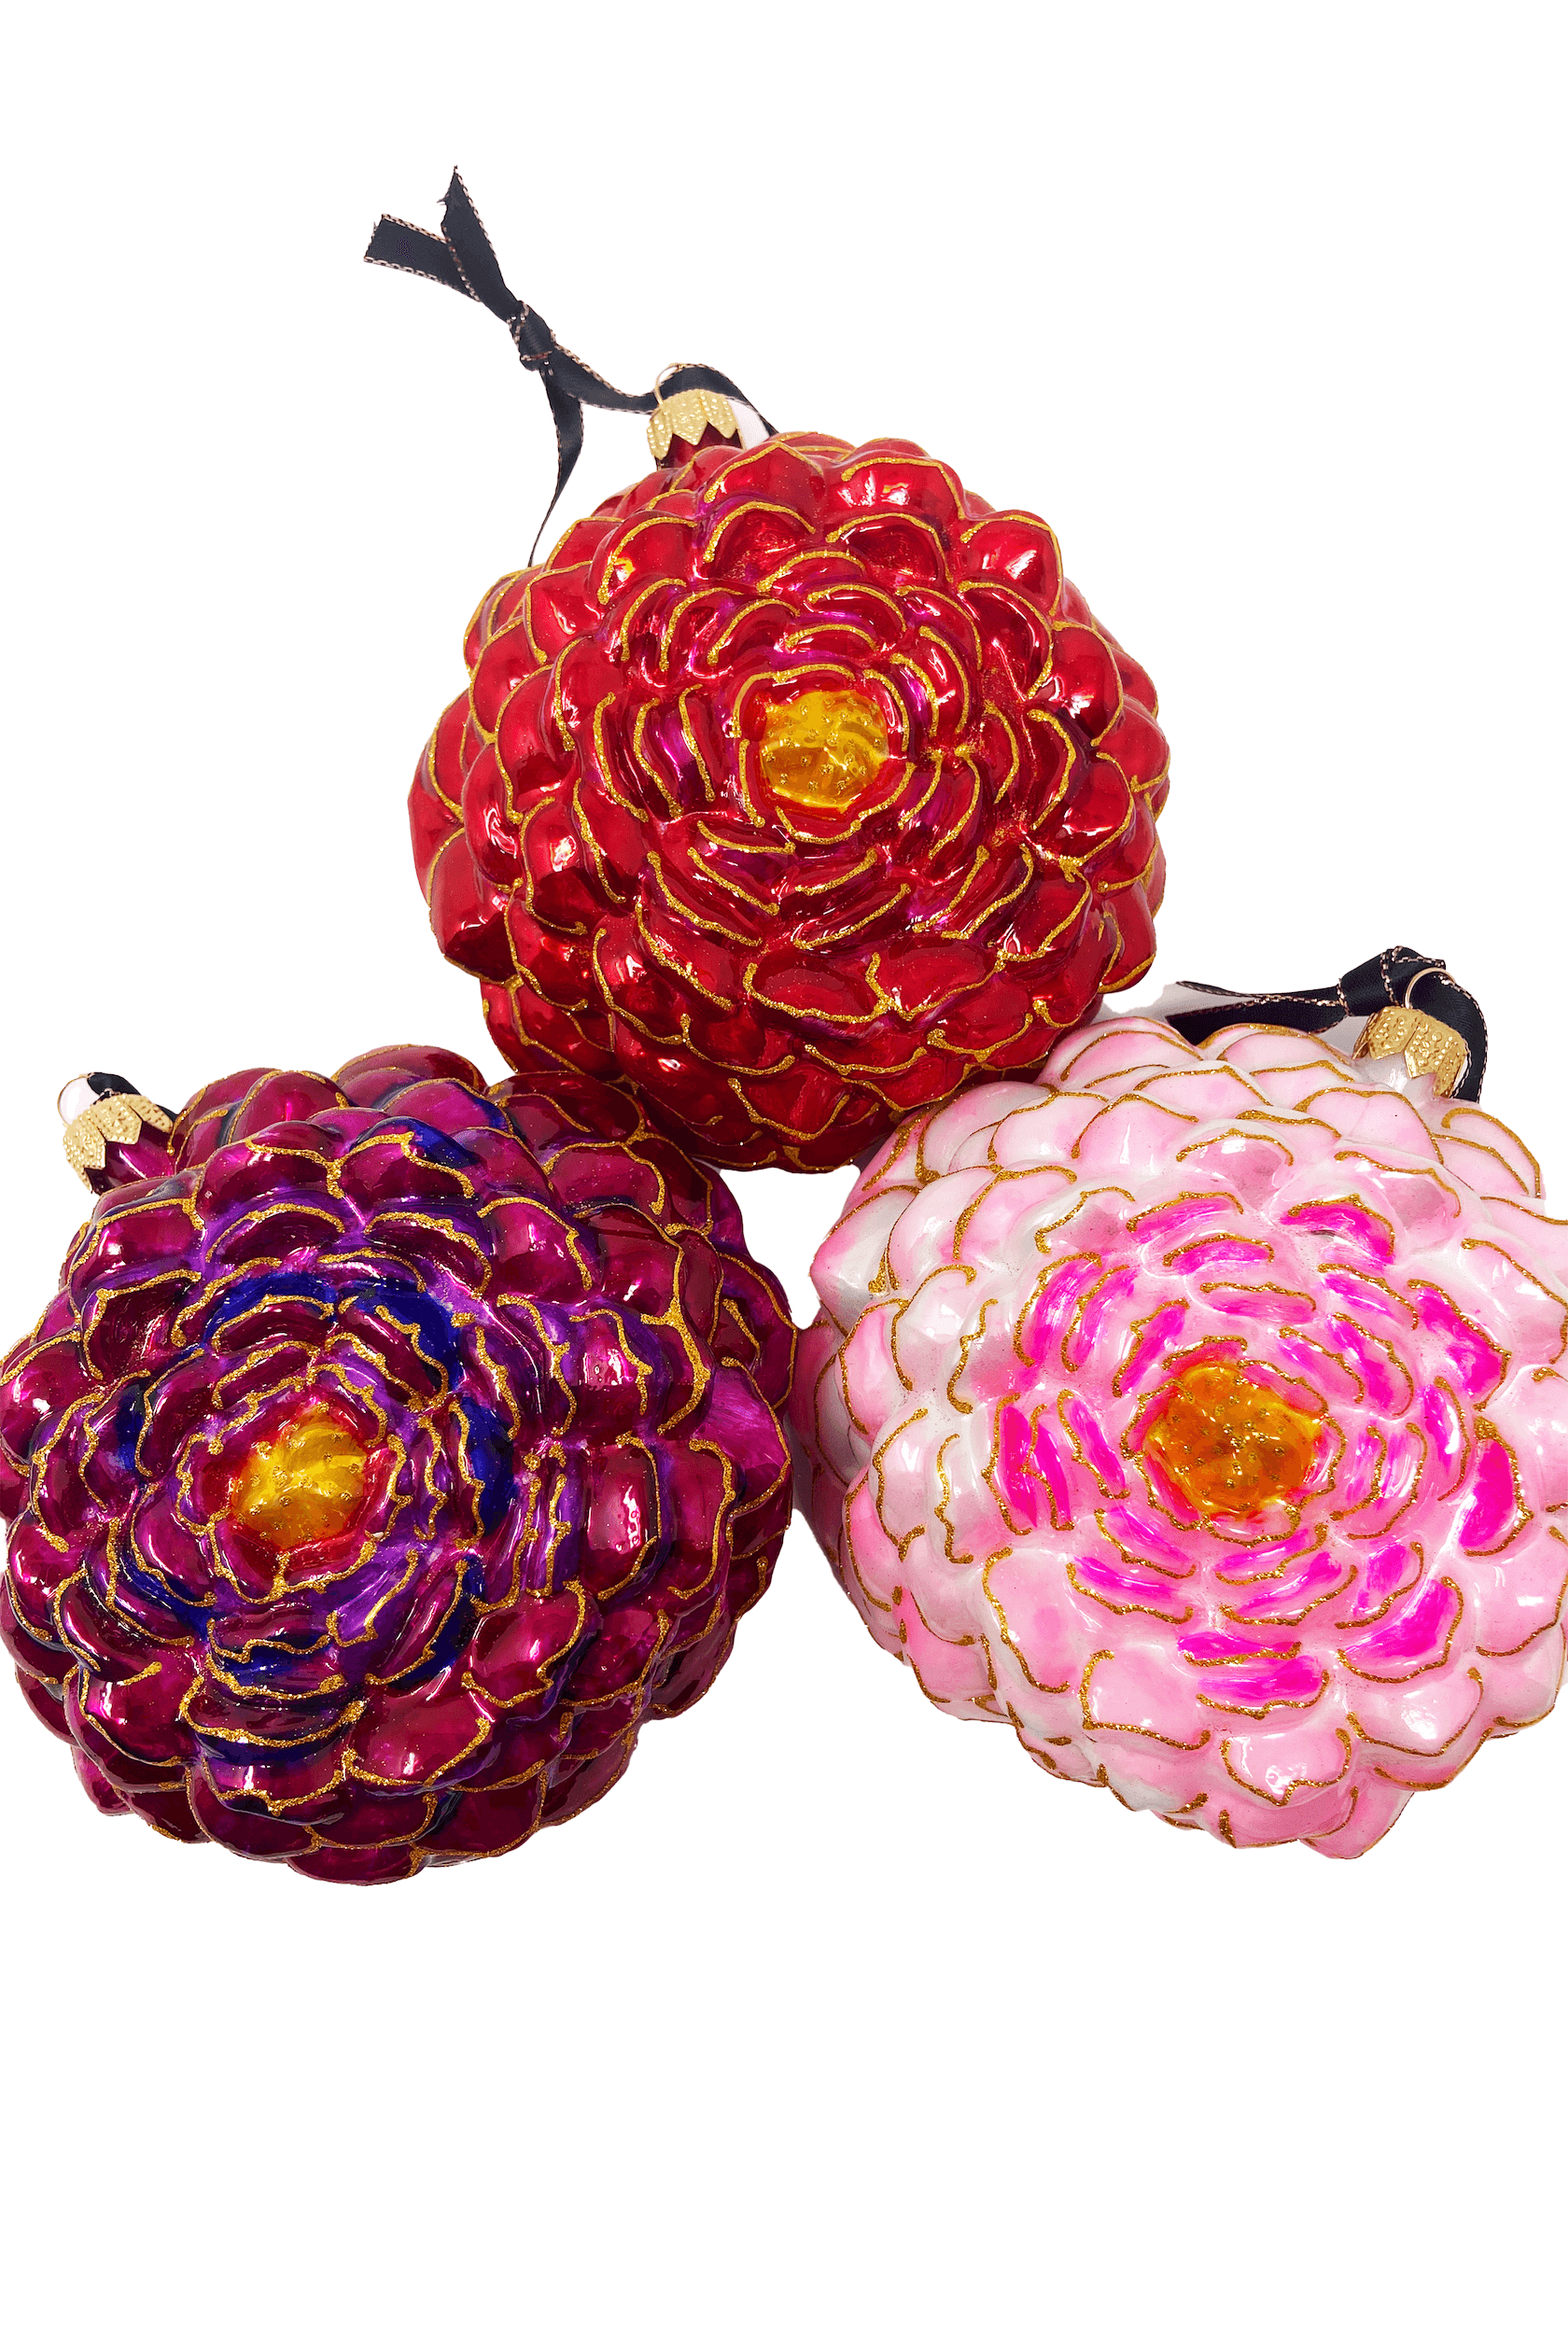 Chinoiserie style glass peony christmas ornament with bright vibrant colors